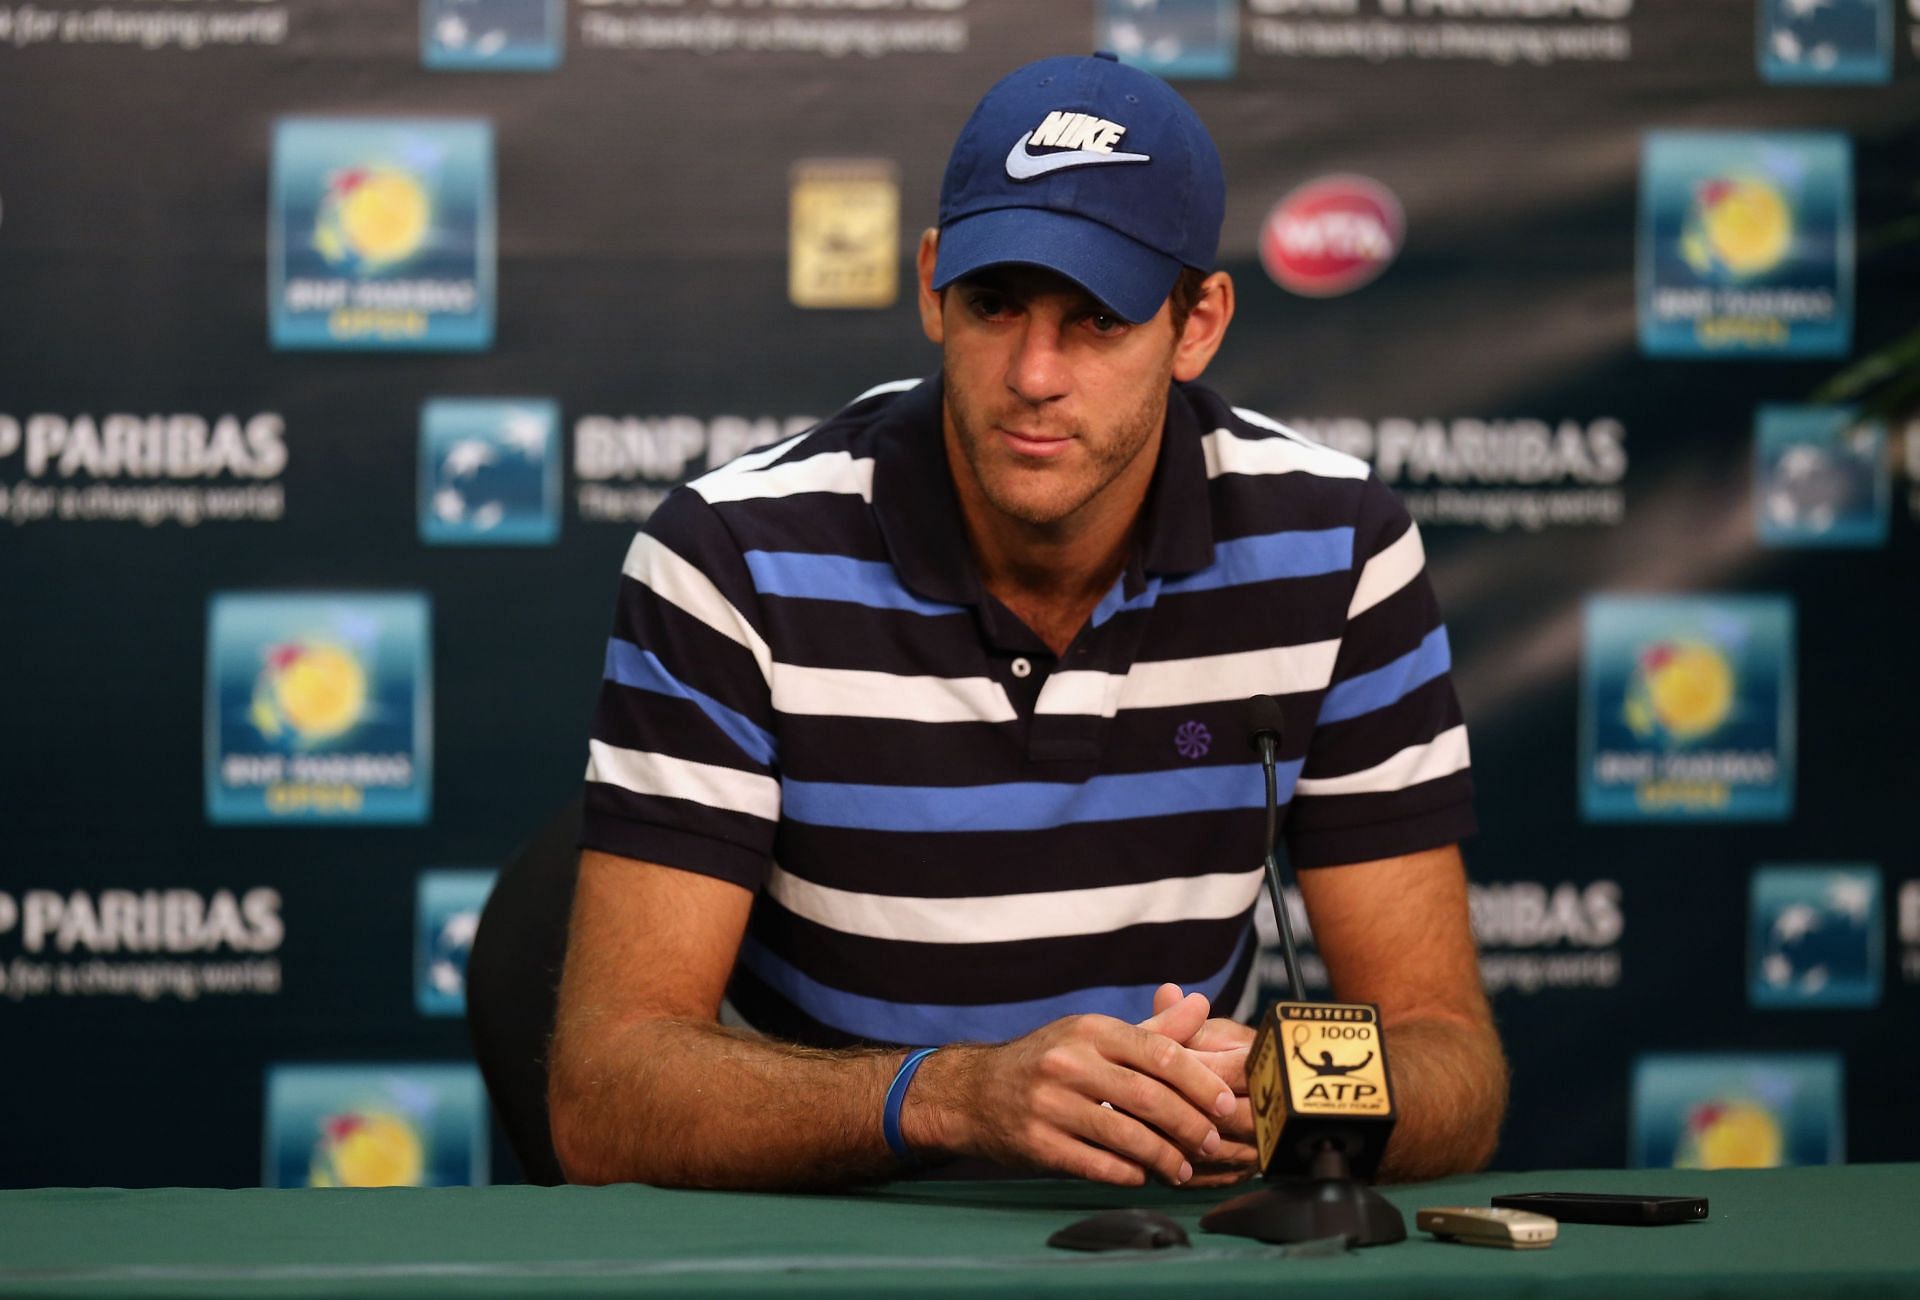 Del Potro missed most of 2014-15 due to a left wrist injury